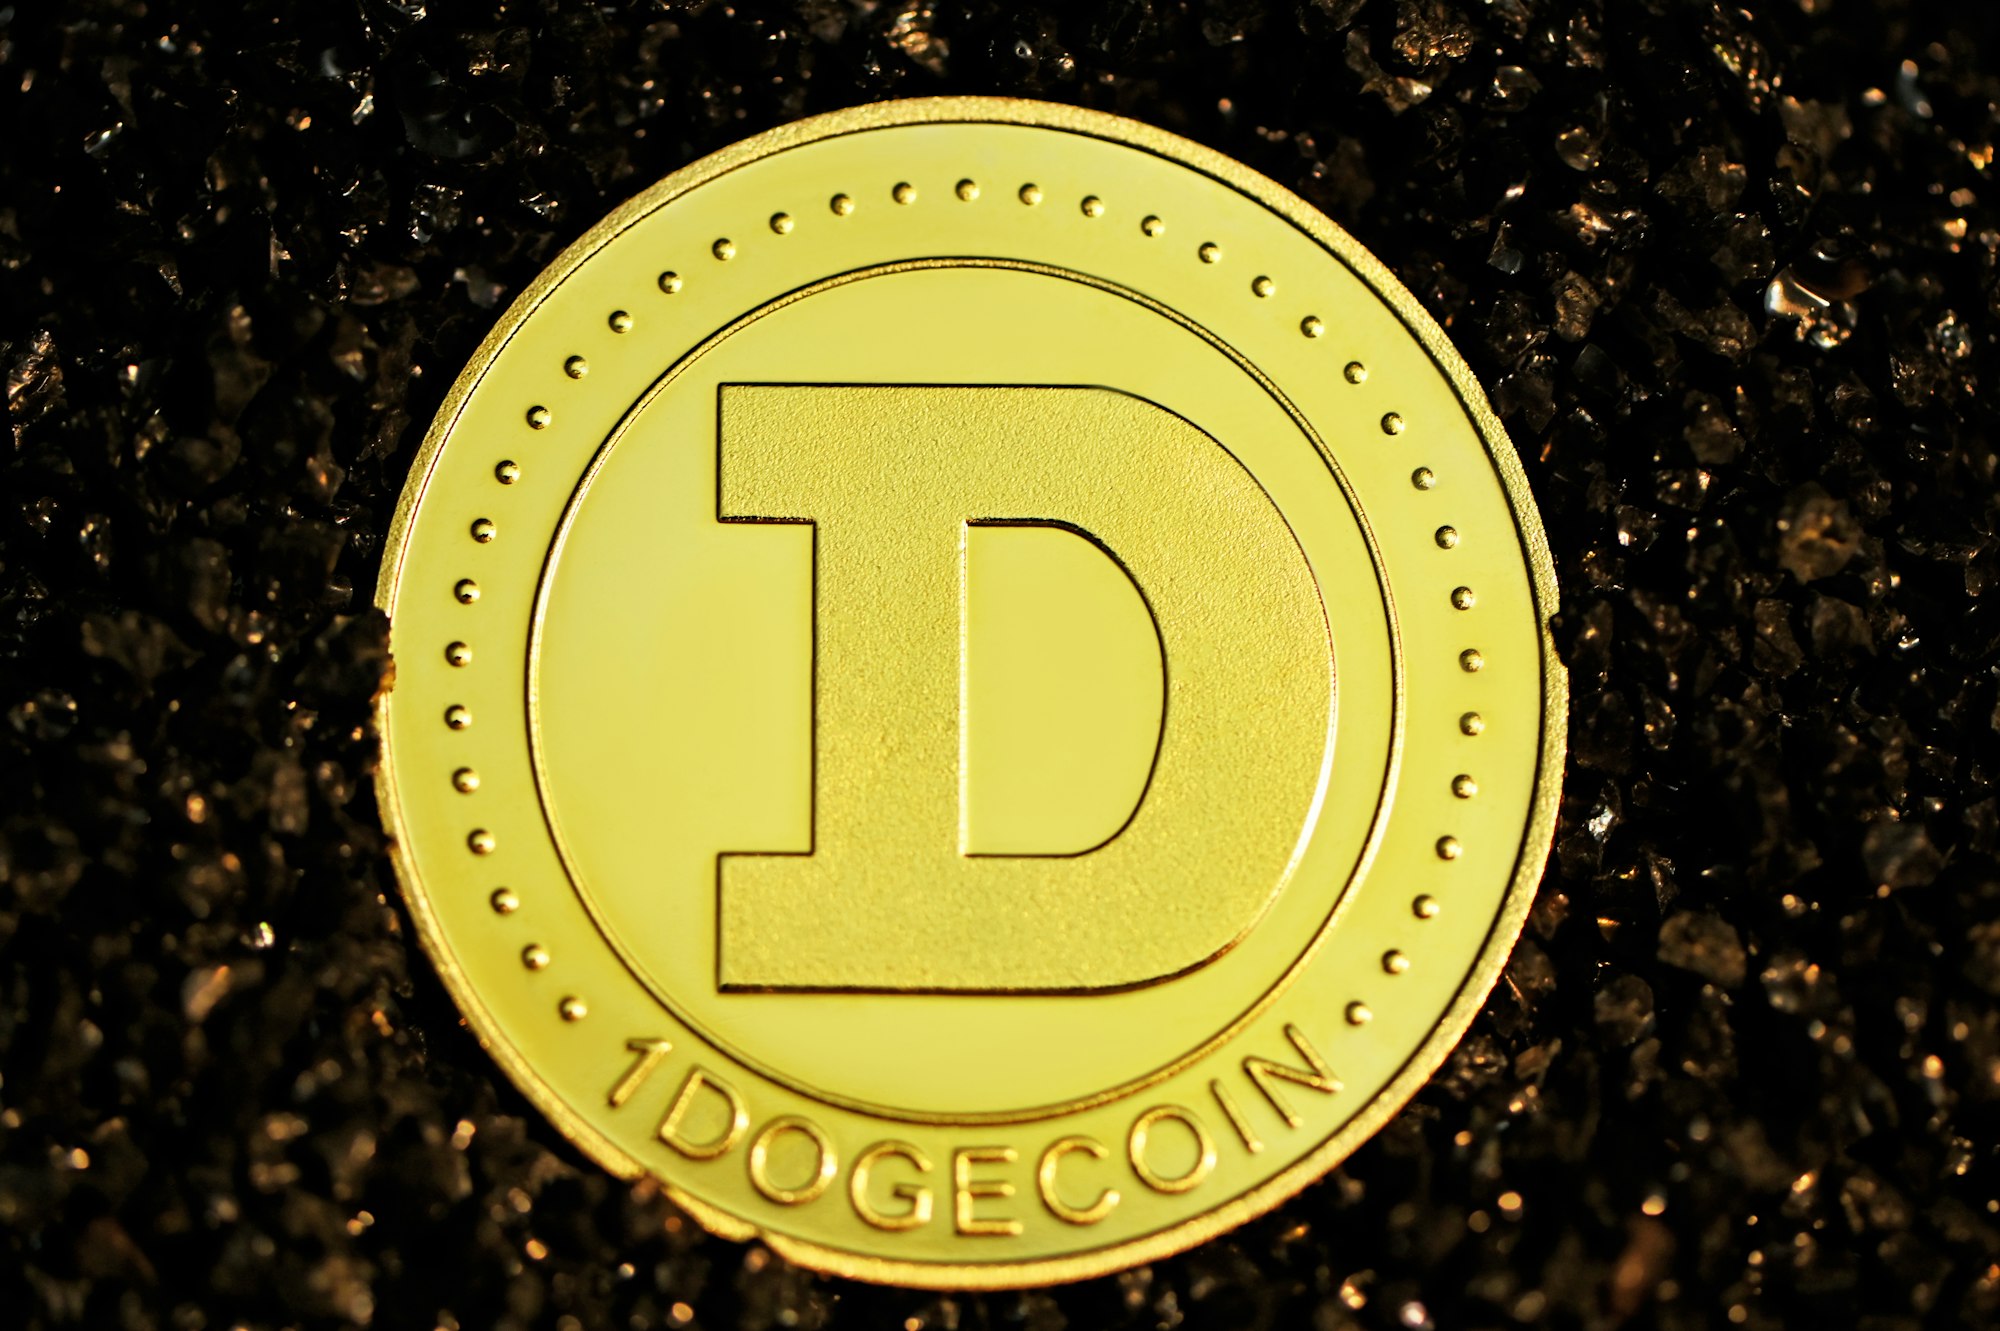 A Dogecoin faces up on a black stoned surface.